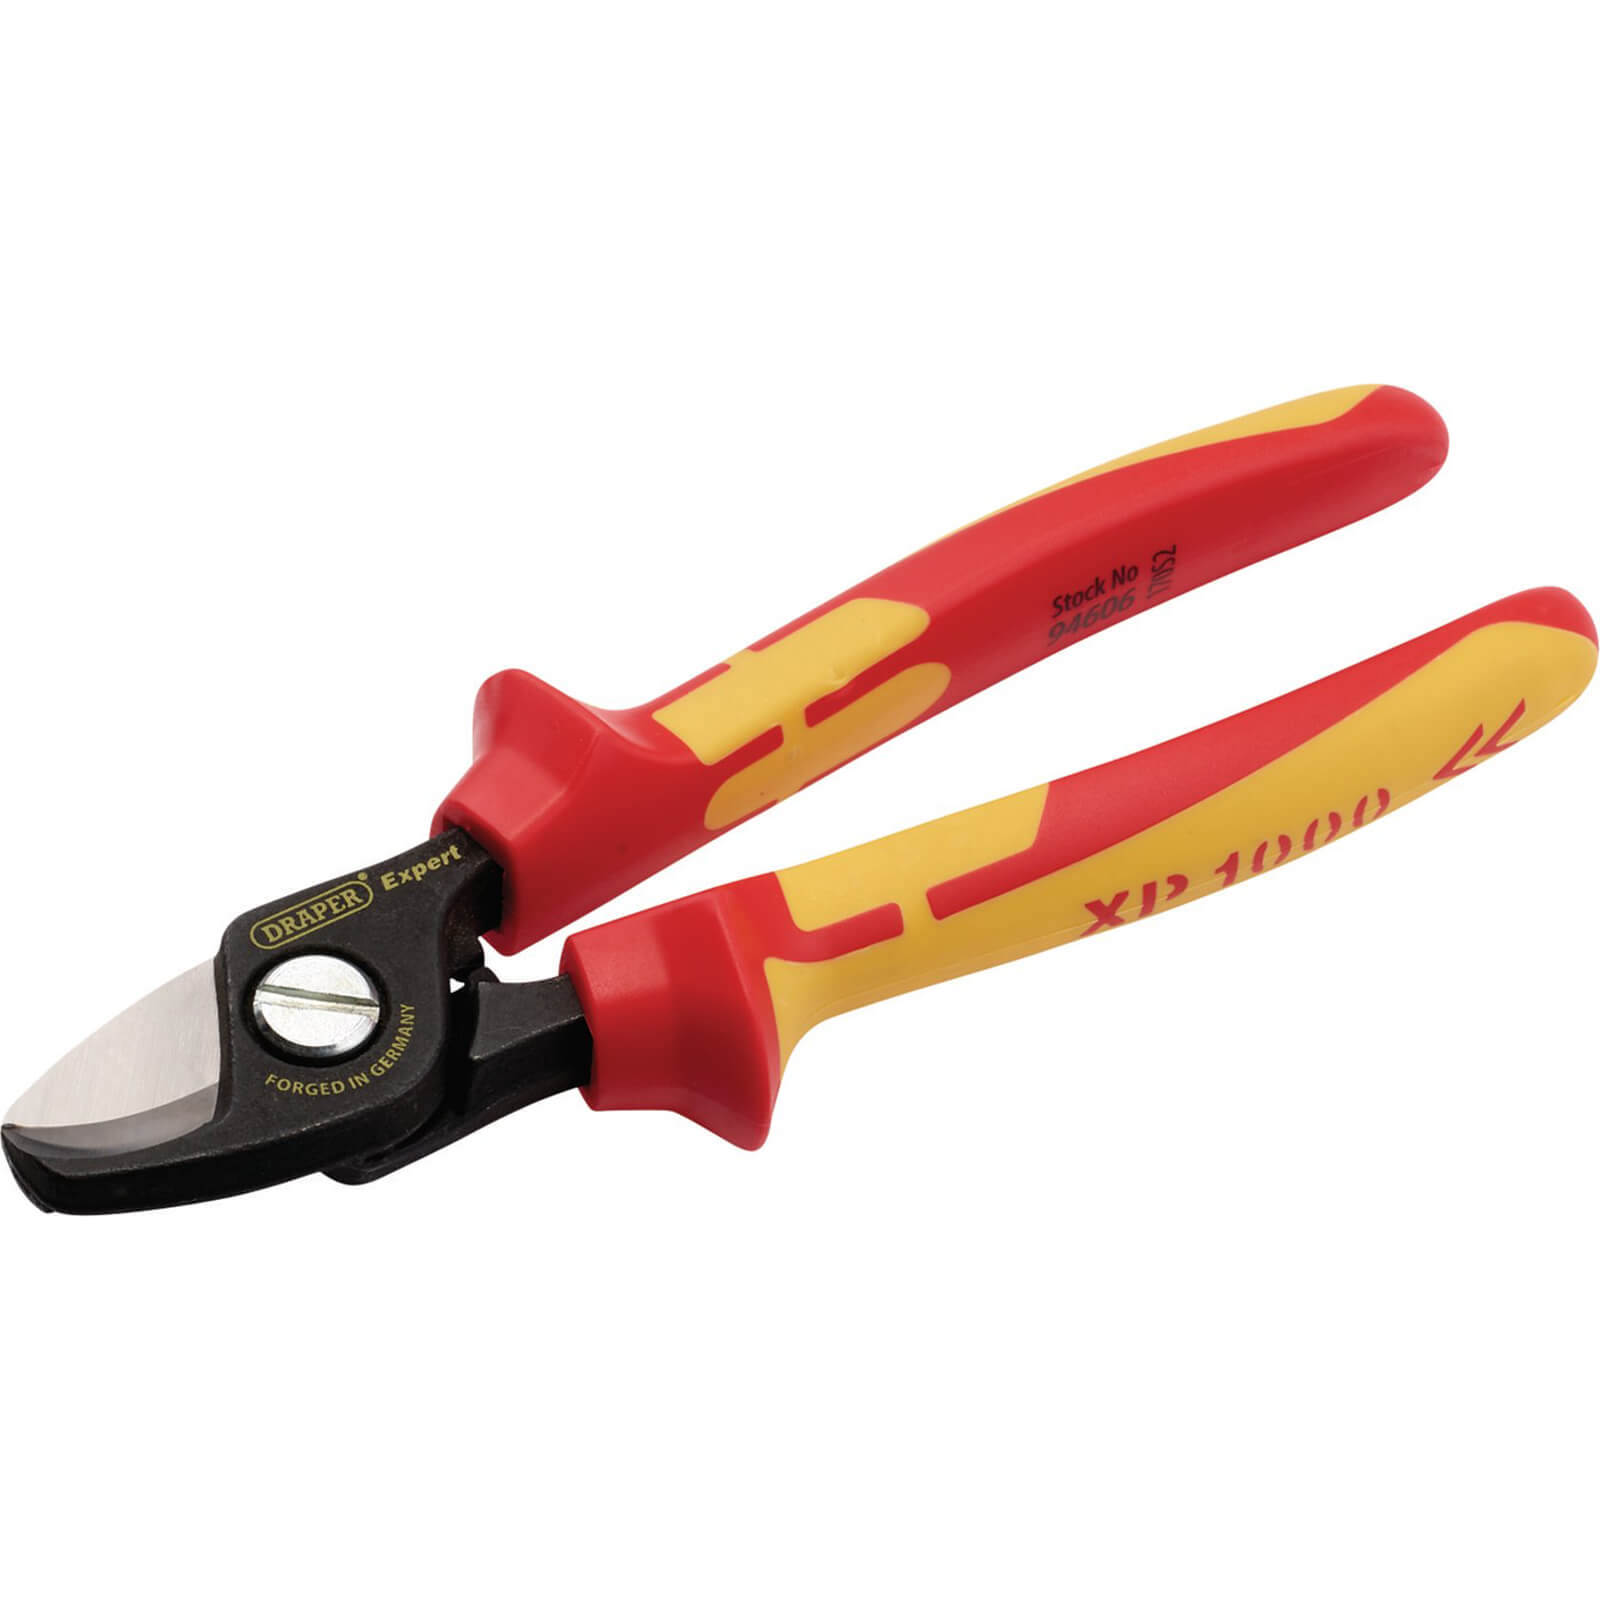 Photo of Draper Xp1000 Vde Insulated Cable Shears 170mm